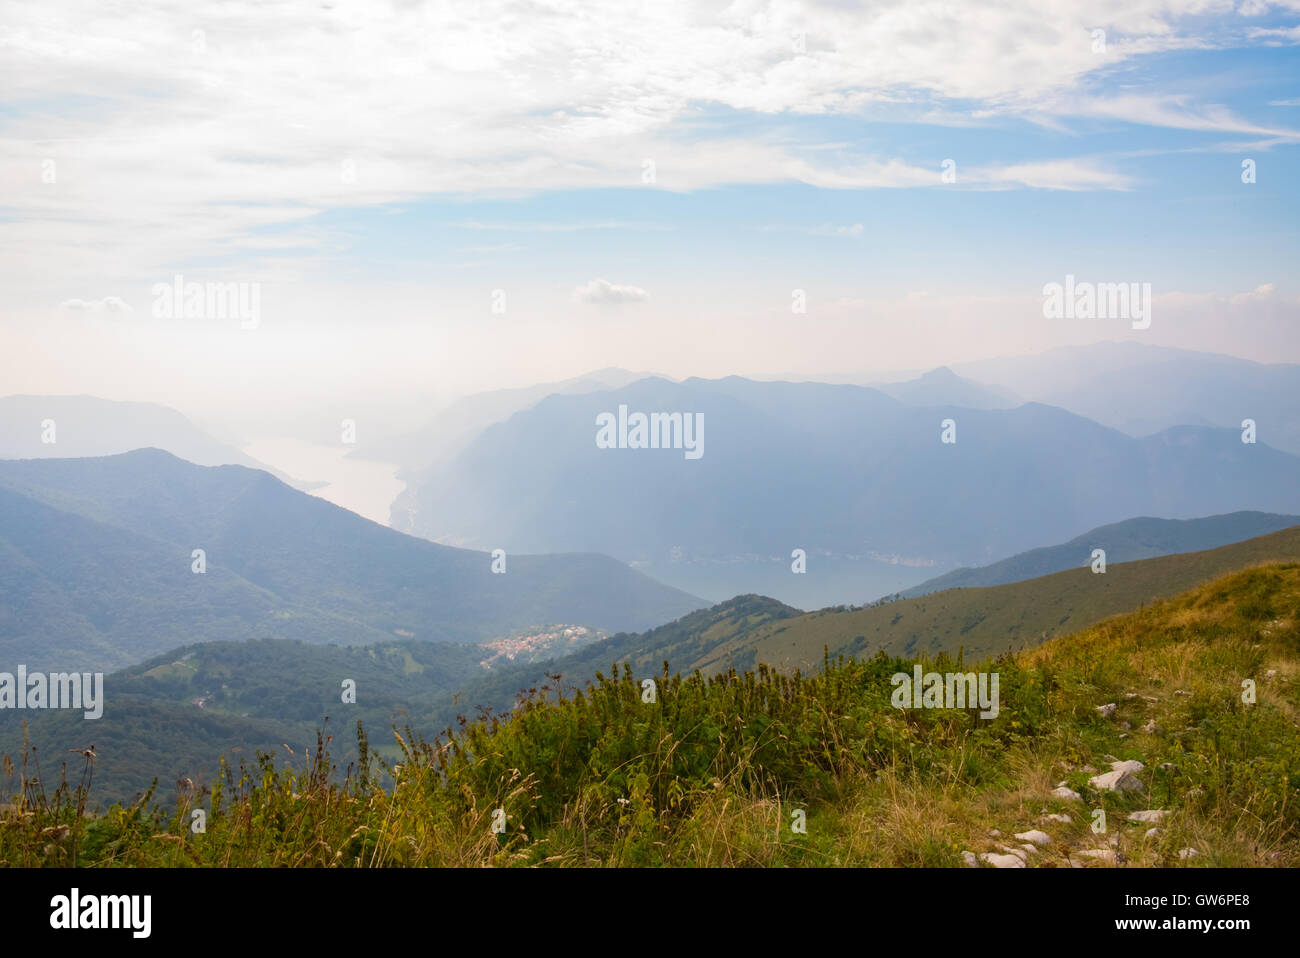 Landscape from the top of a mountain with lake in the background Stock Photo